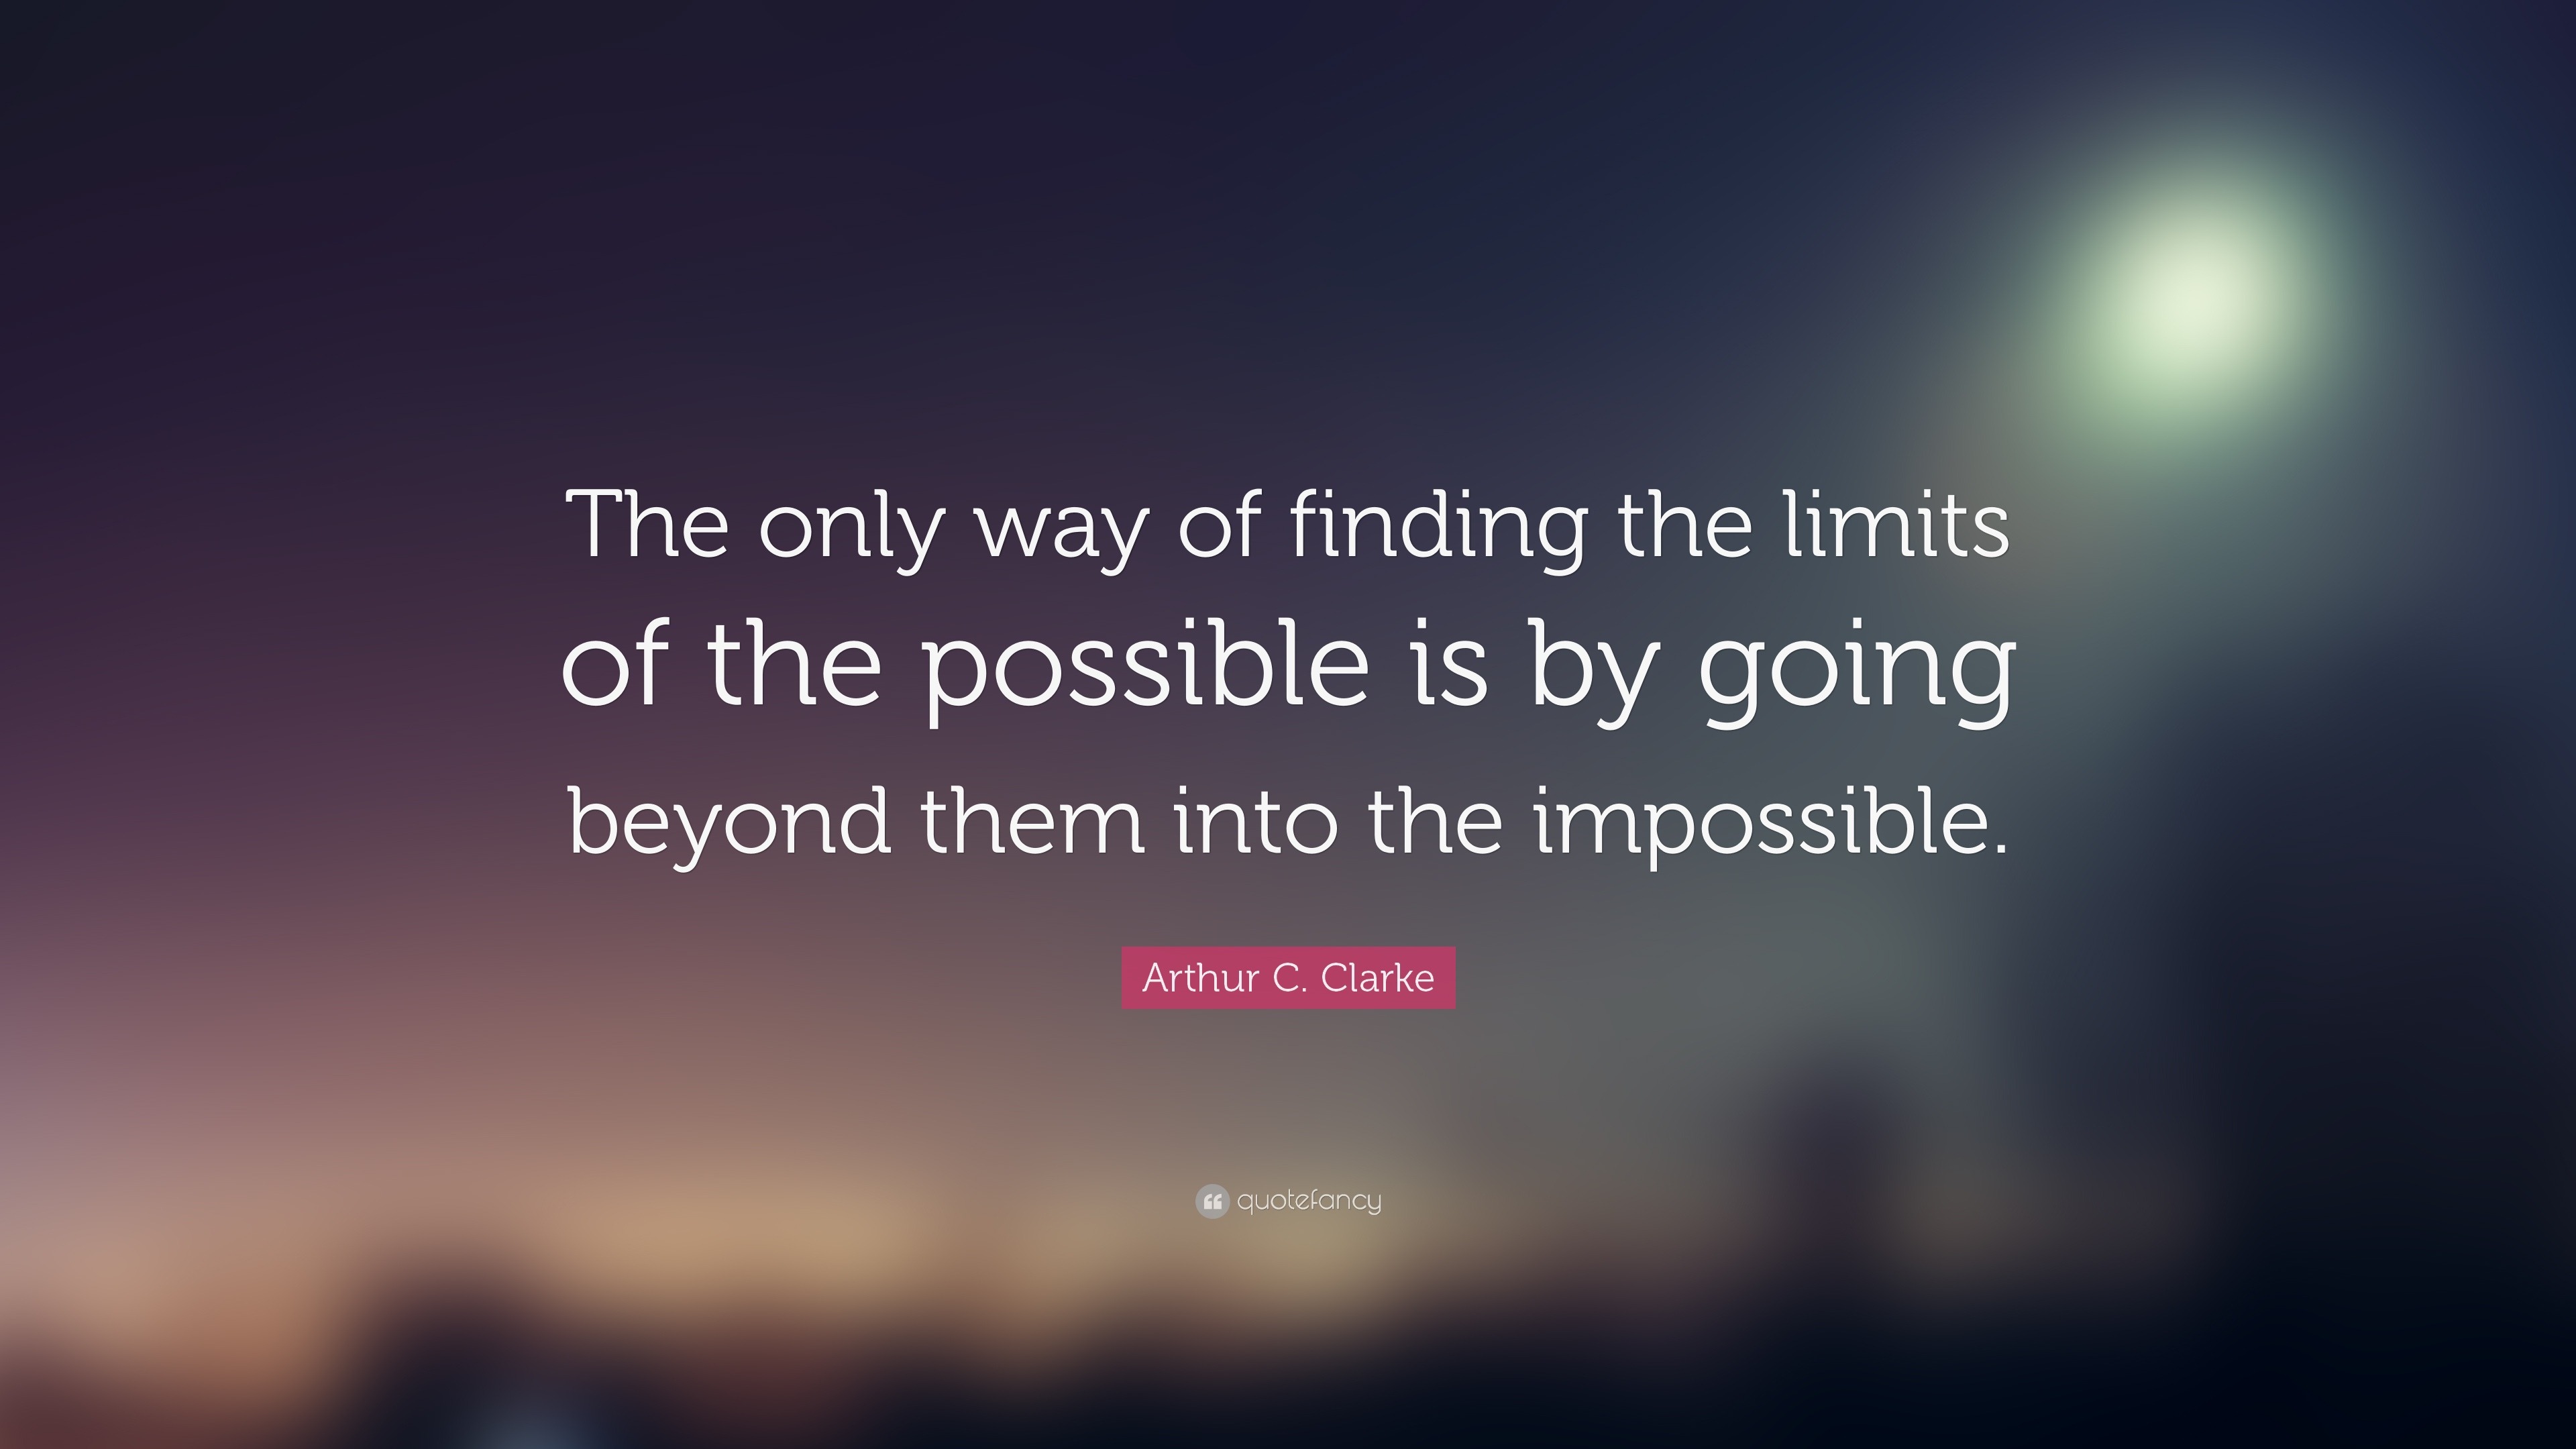 Arthur C. Clarke Quote: “The only way of finding the limits of the ...